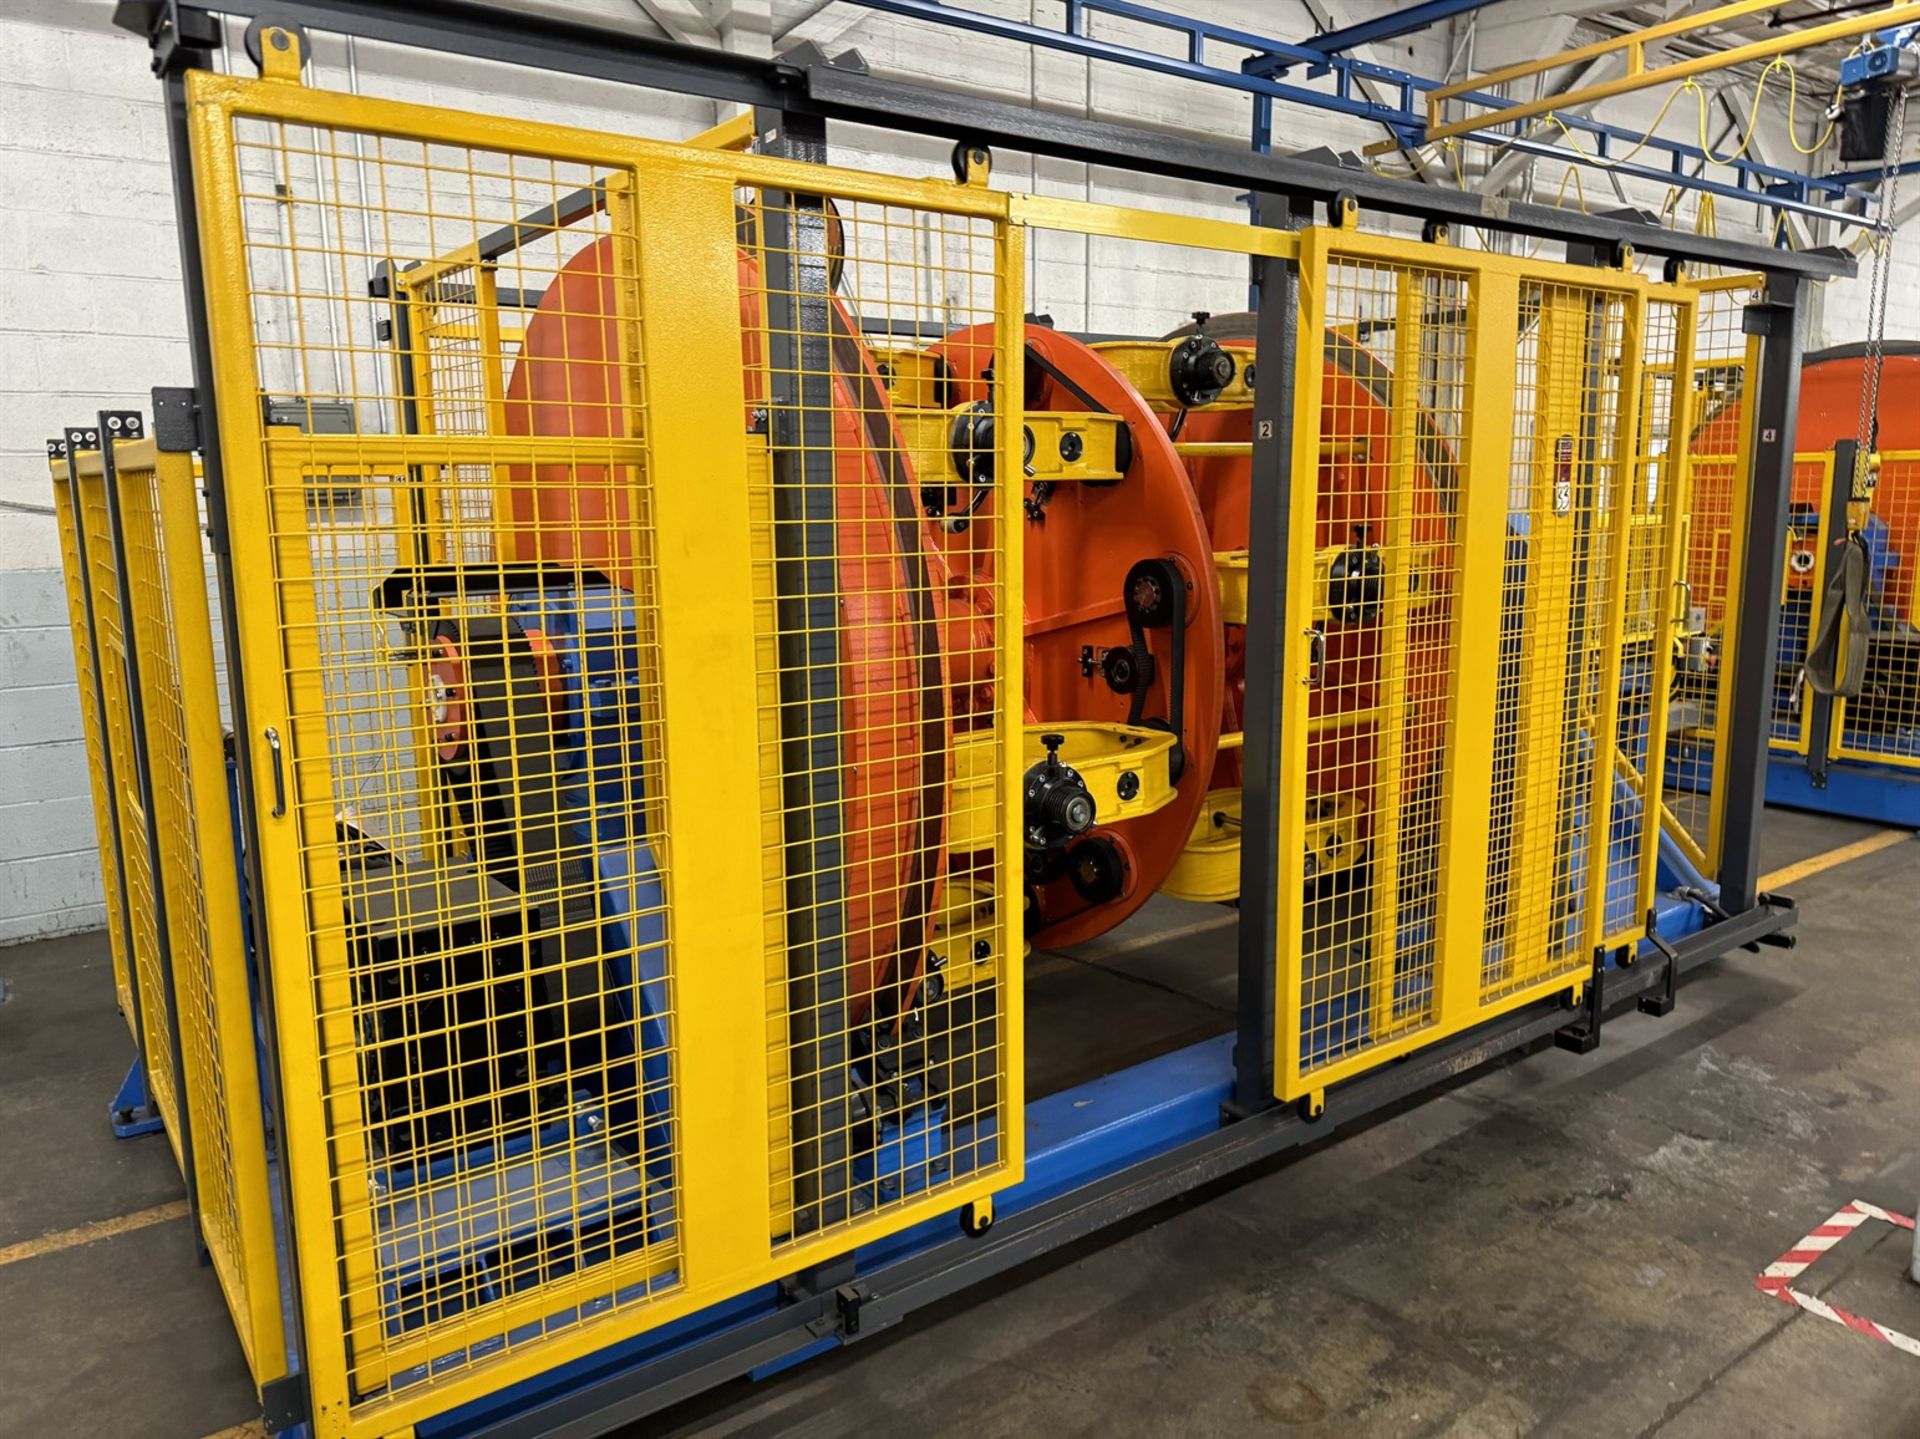 2021 KALMARK INTEGRATED SYSTEMS LTD 12+18 400mm L-R Planetary Cabler Line *Subject to 24-Hour Owner - Image 24 of 27